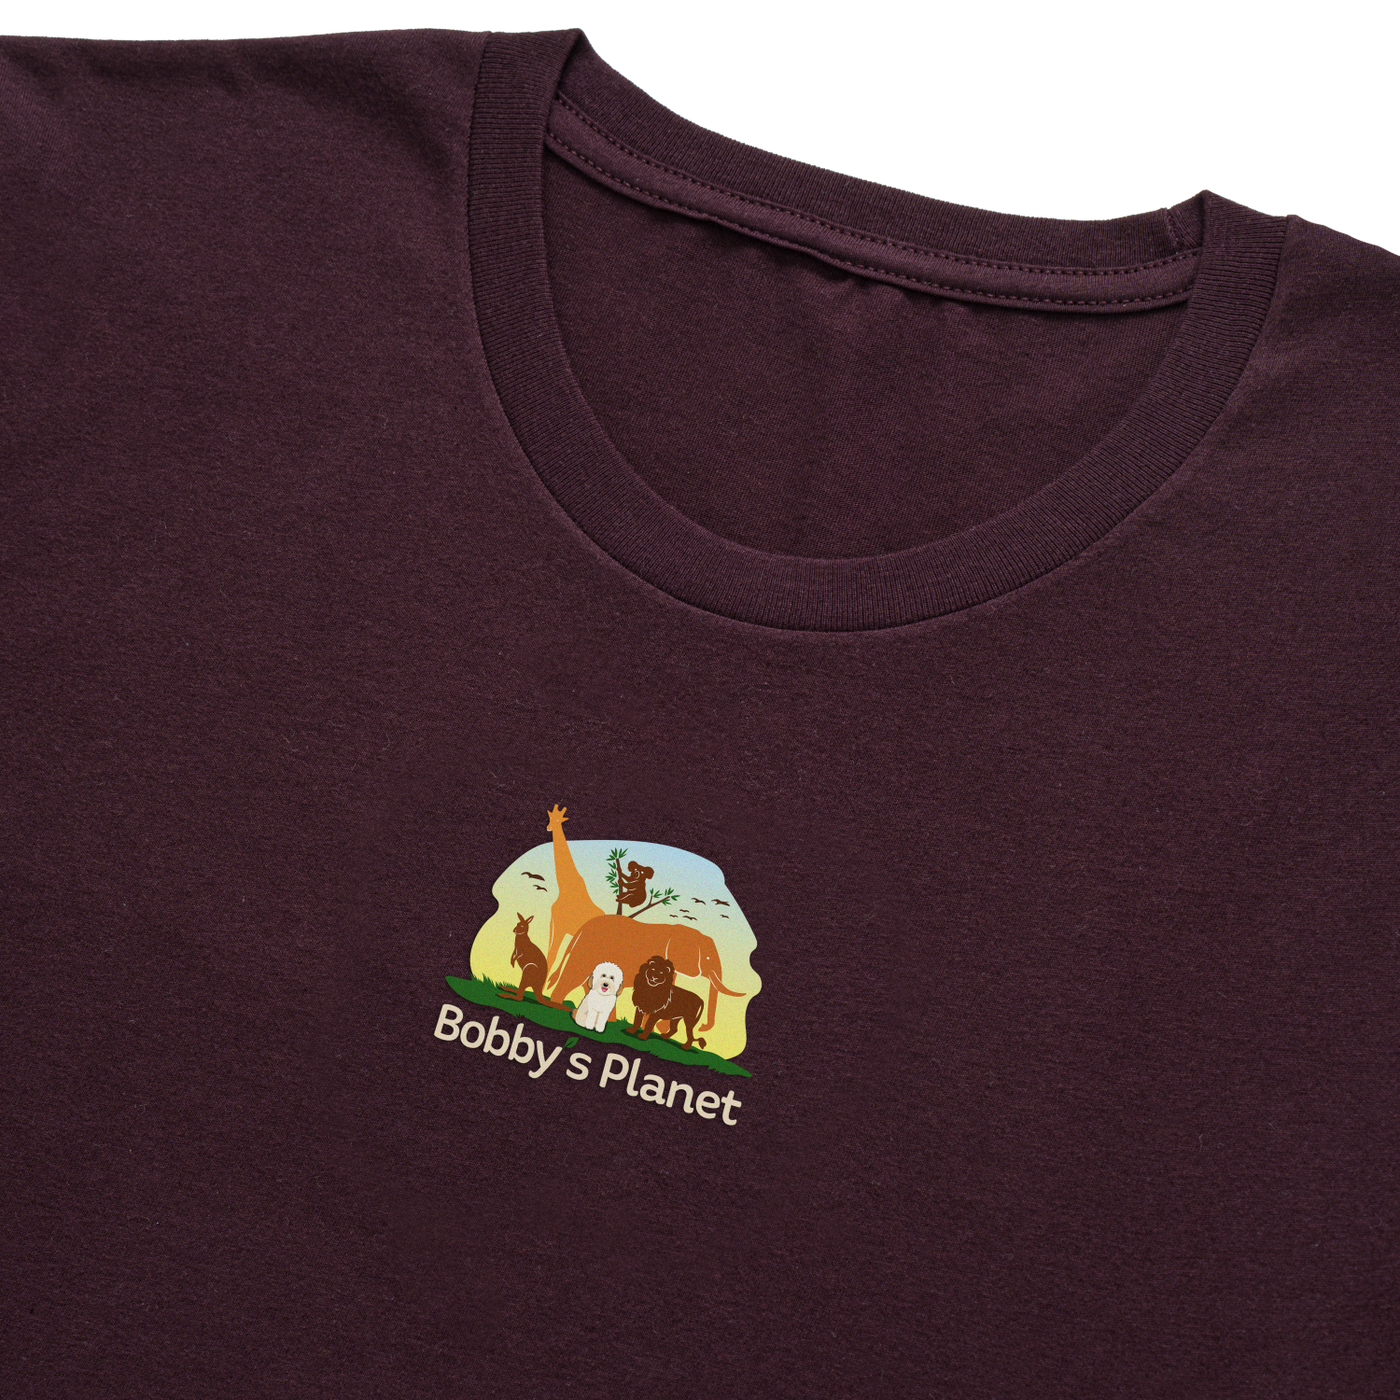 Bobby's Planet Men's Embroidered Poodle T-Shirt from Bobbys Planet Toy Poodle Collection in Oxblood Color#color_oxblood